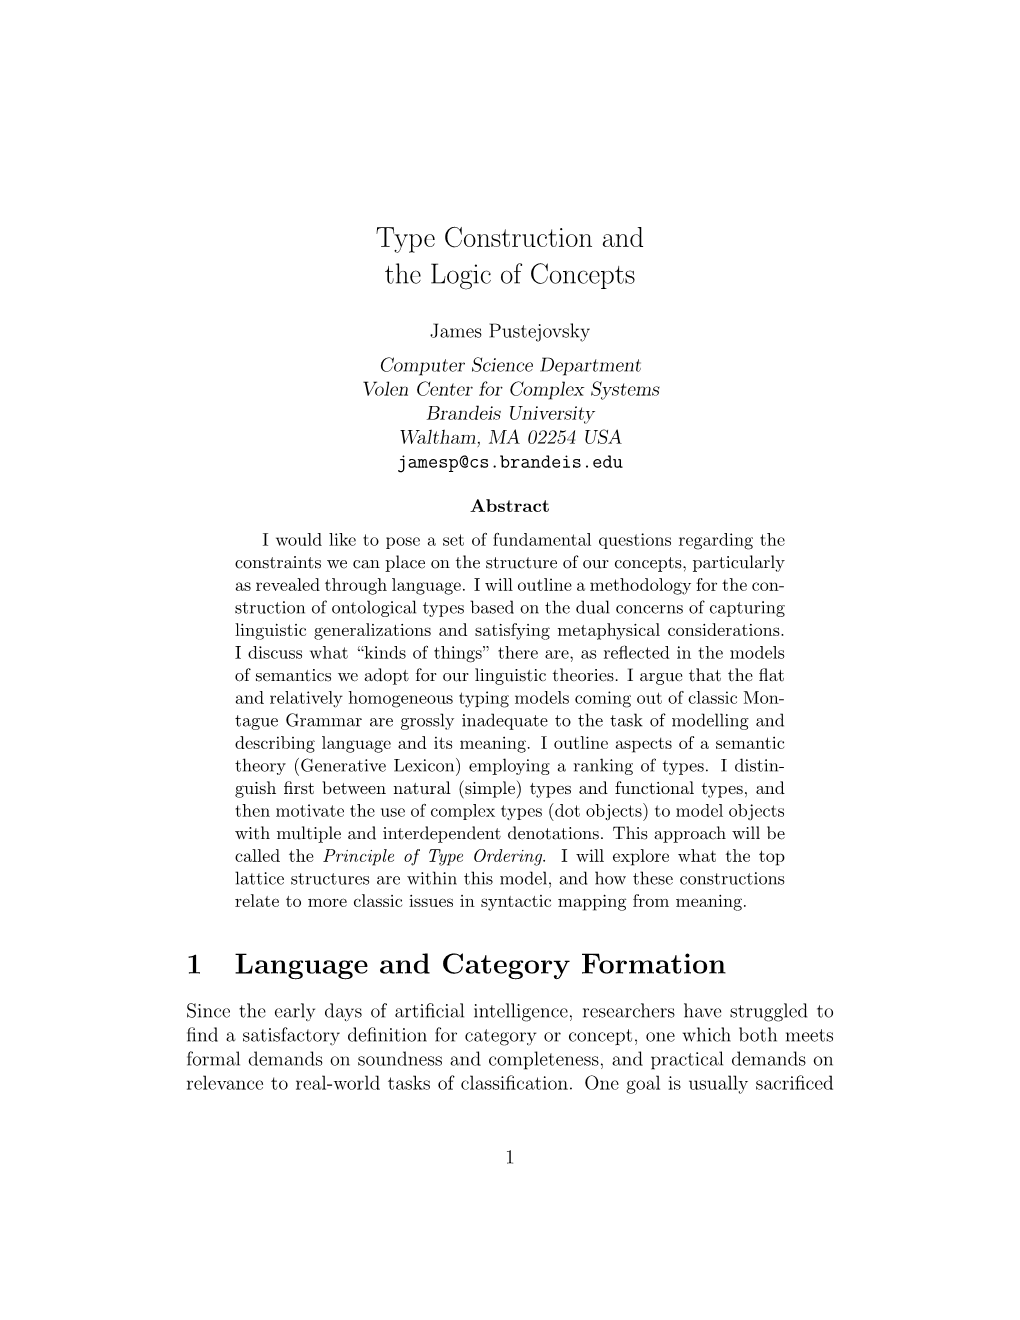 Type Construction and the Logic of Concepts